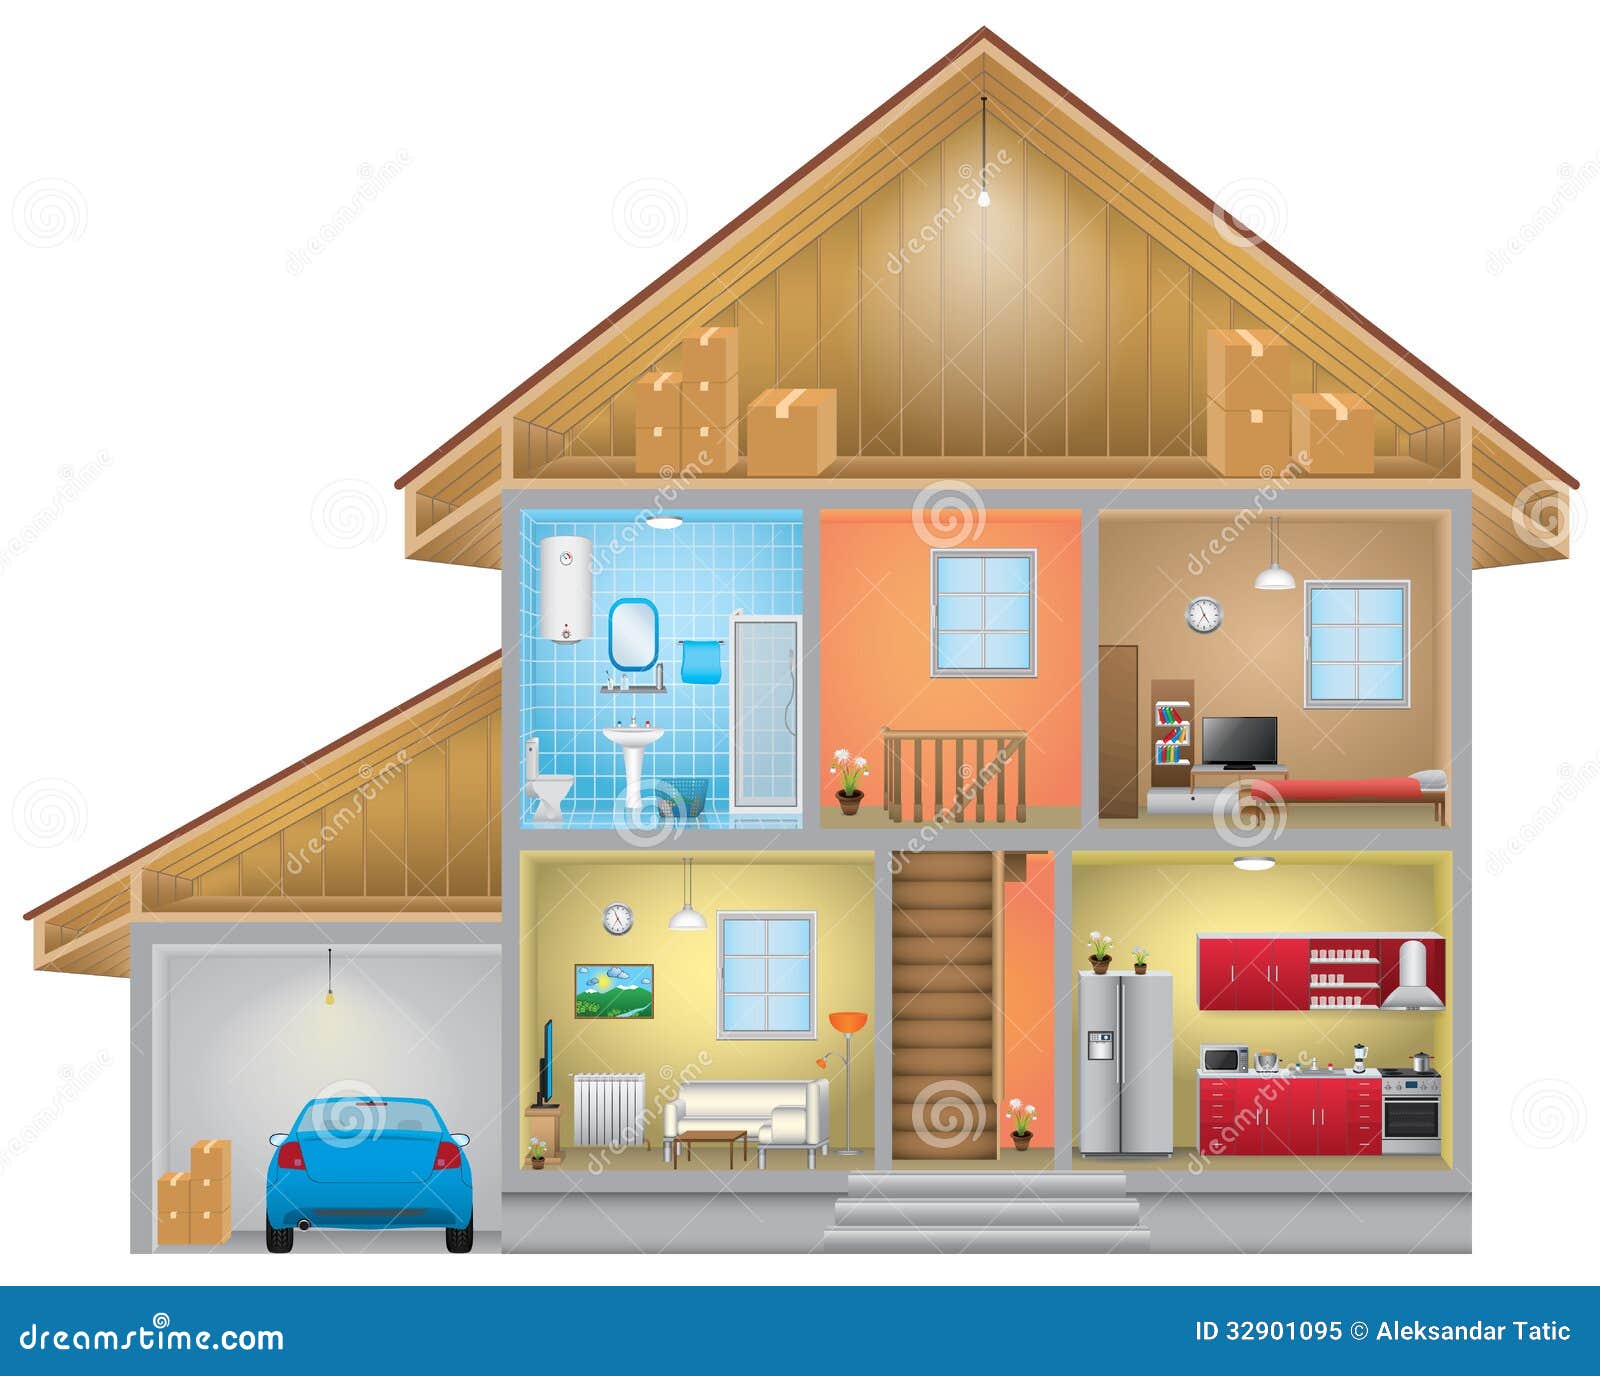 clipart of rooms inside the house - photo #48